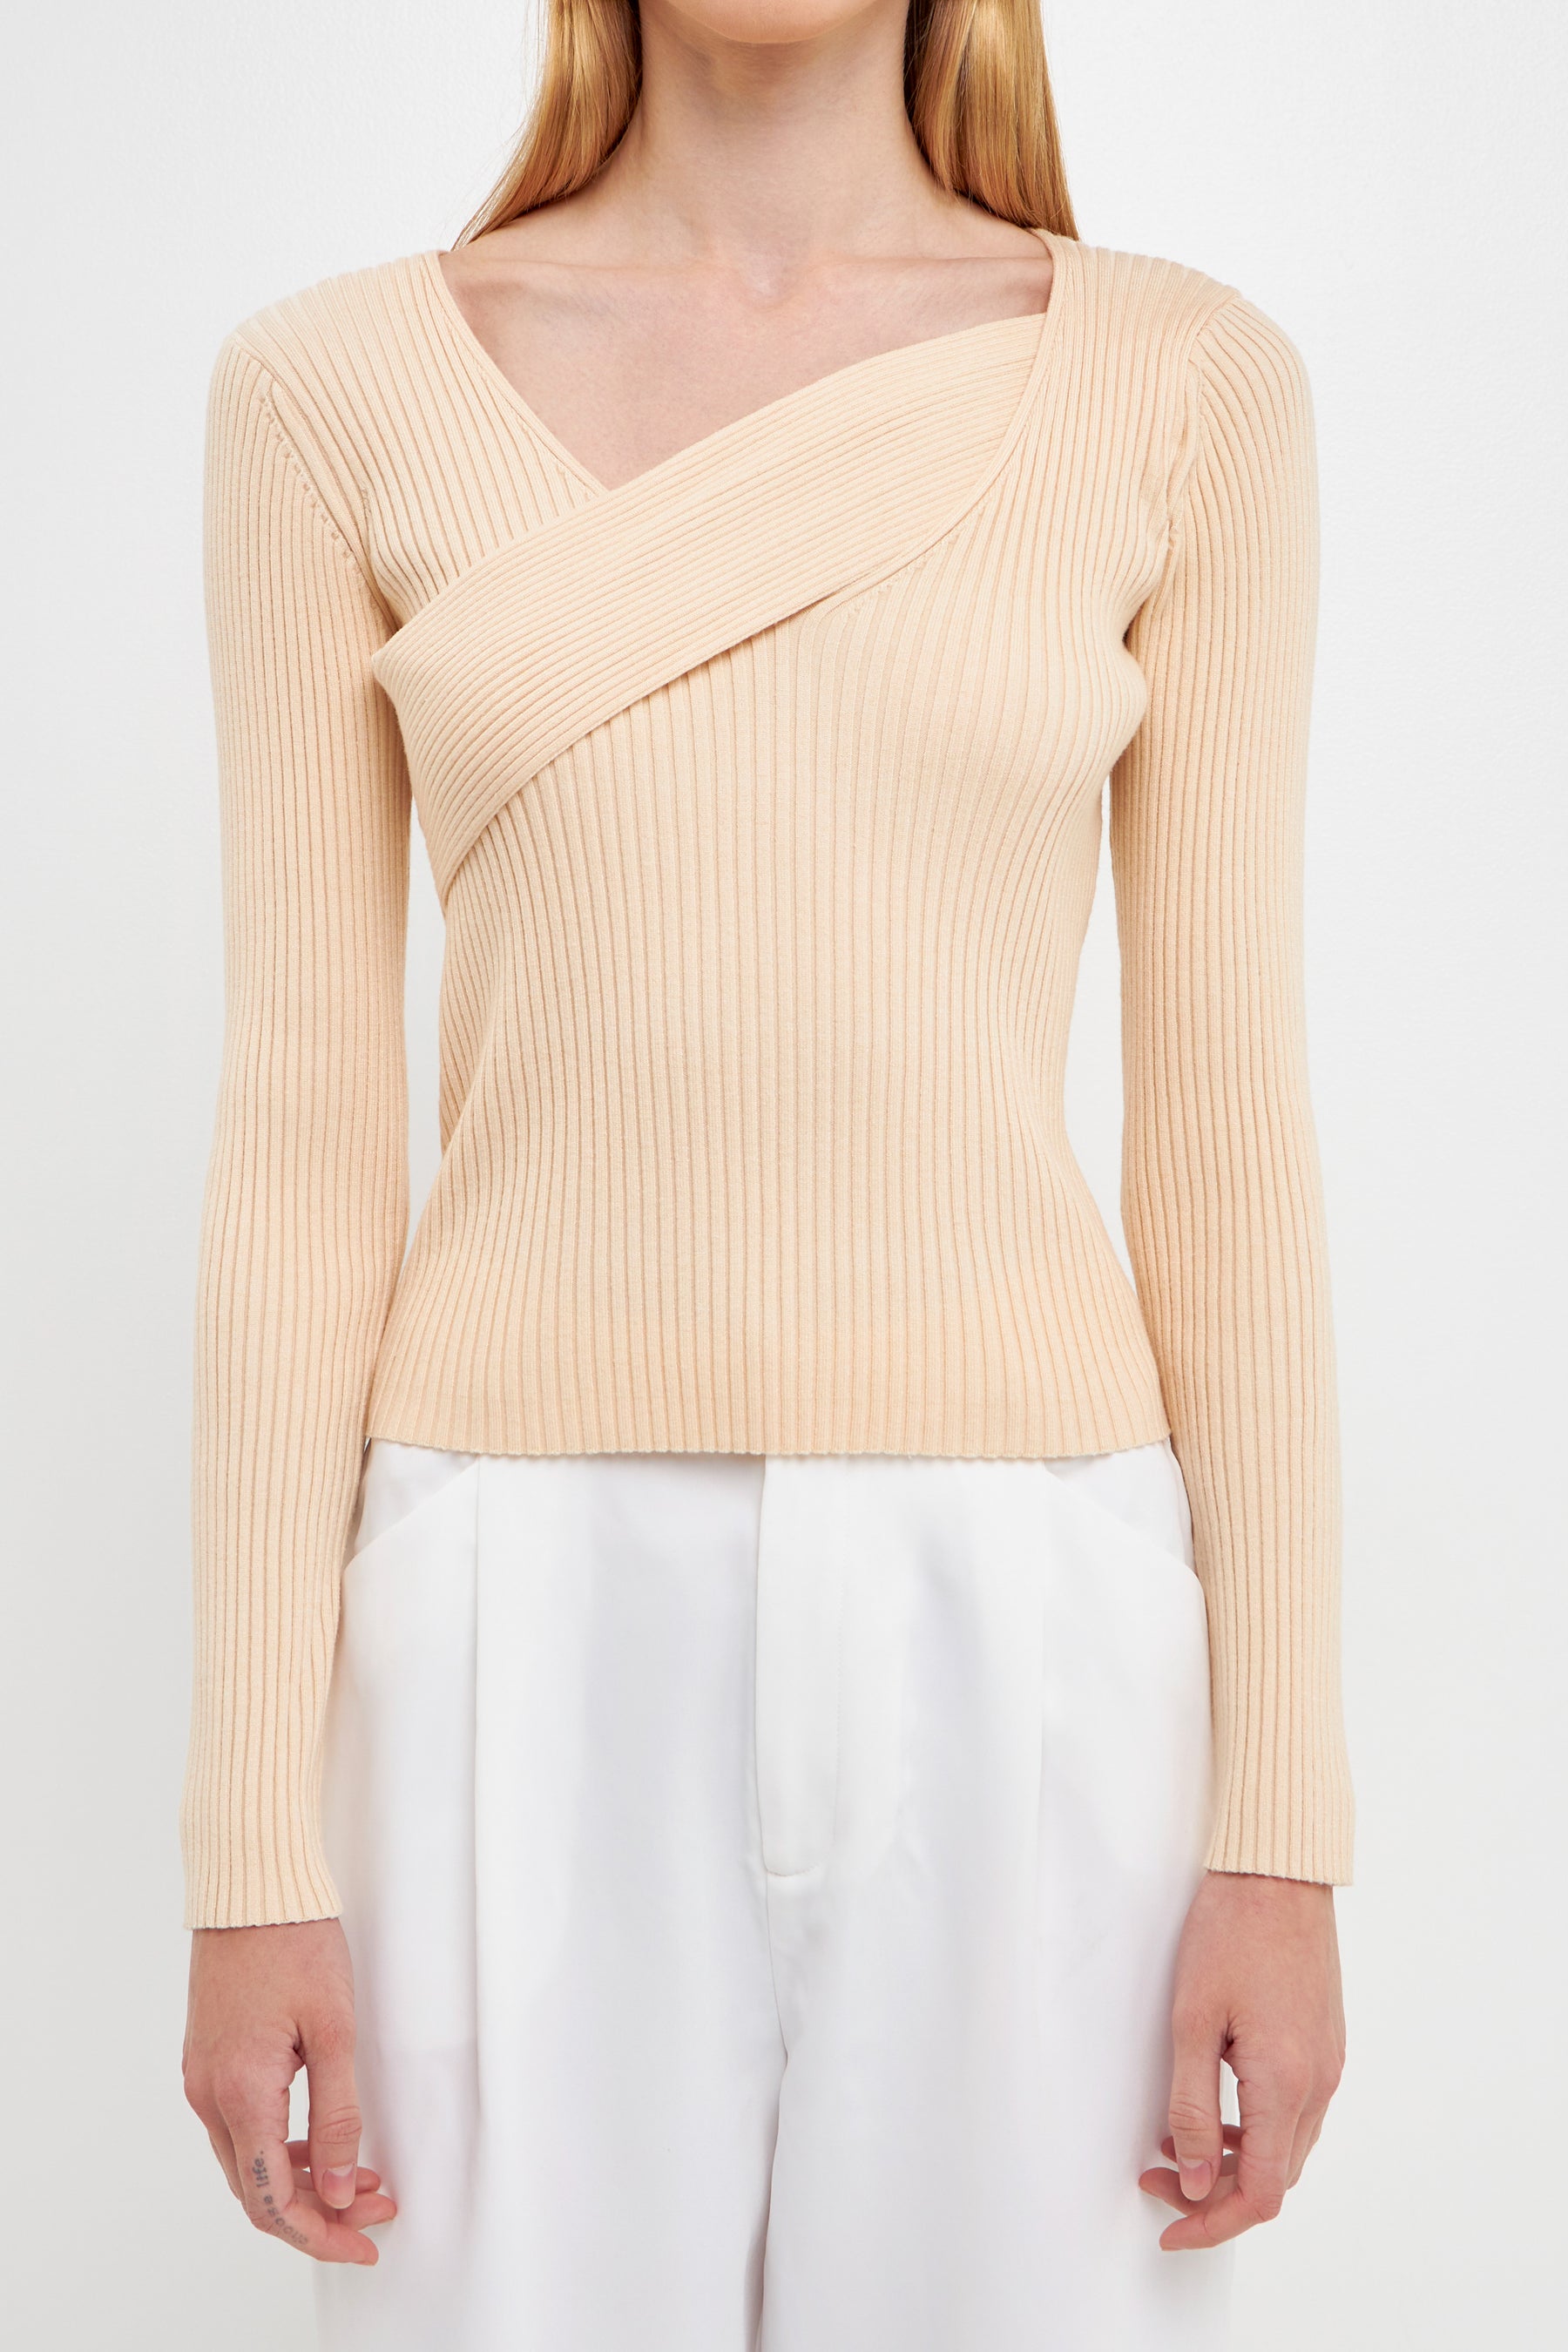 ENDLESS ROSE - Cross Wrap Fine Knit Sweater - TOPS available at Objectrare